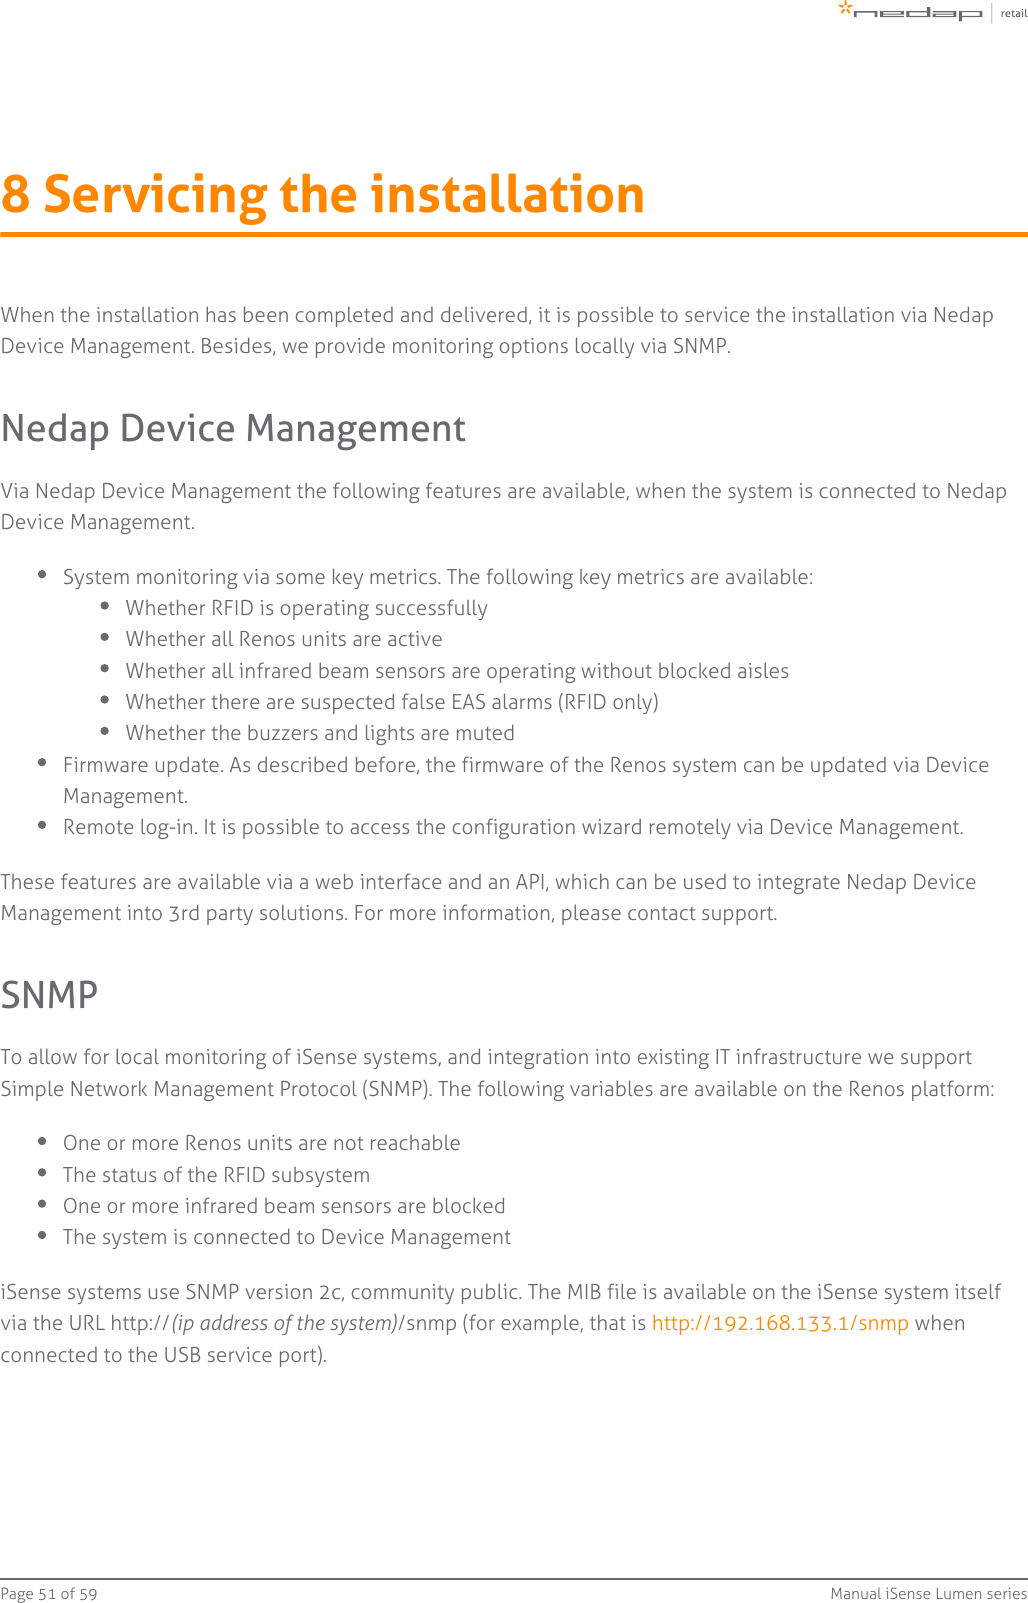 Page   of 51 59 Manual iSense Lumen series8 Servicing the installationWhen the installation has been completed and delivered, it is possible to service the installation via NedapDevice Management. Besides, we provide monitoring options locally via SNMP.Nedap Device ManagementVia Nedap Device Management the following features are available, when the system is connected to NedapDevice Management.System monitoring via some key metrics. The following key metrics are available:Whether RFID is operating successfullyWhether all Renos units are activeWhether all infrared beam sensors are operating without blocked aislesWhether there are suspected false EAS alarms (RFID only)Whether the buzzers and lights are mutedFirmware update. As described before, the firmware of the Renos system can be updated via DeviceManagement.Remote log-in. It is possible to access the configuration wizard remotely via Device Management.These features are available via a web interface and an API, which can be used to integrate Nedap DeviceManagement into 3rd party solutions. For more information, please contact support.SNMPTo allow for local monitoring of iSense systems, and integration into existing IT infrastructure we supportSimple Network Management Protocol (SNMP). The following variables are available on the Renos platform:One or more Renos units are not reachableThe status of the RFID subsystemOne or more infrared beam sensors are blockedThe system is connected to Device ManagementiSense systems use SNMP version 2c, community public. The MIB file is available on the iSense system itselfvia the URL http:// /snmp (for example, that is   when(ip address of the system) http://192.168.133.1/snmpconnected to the USB service port).